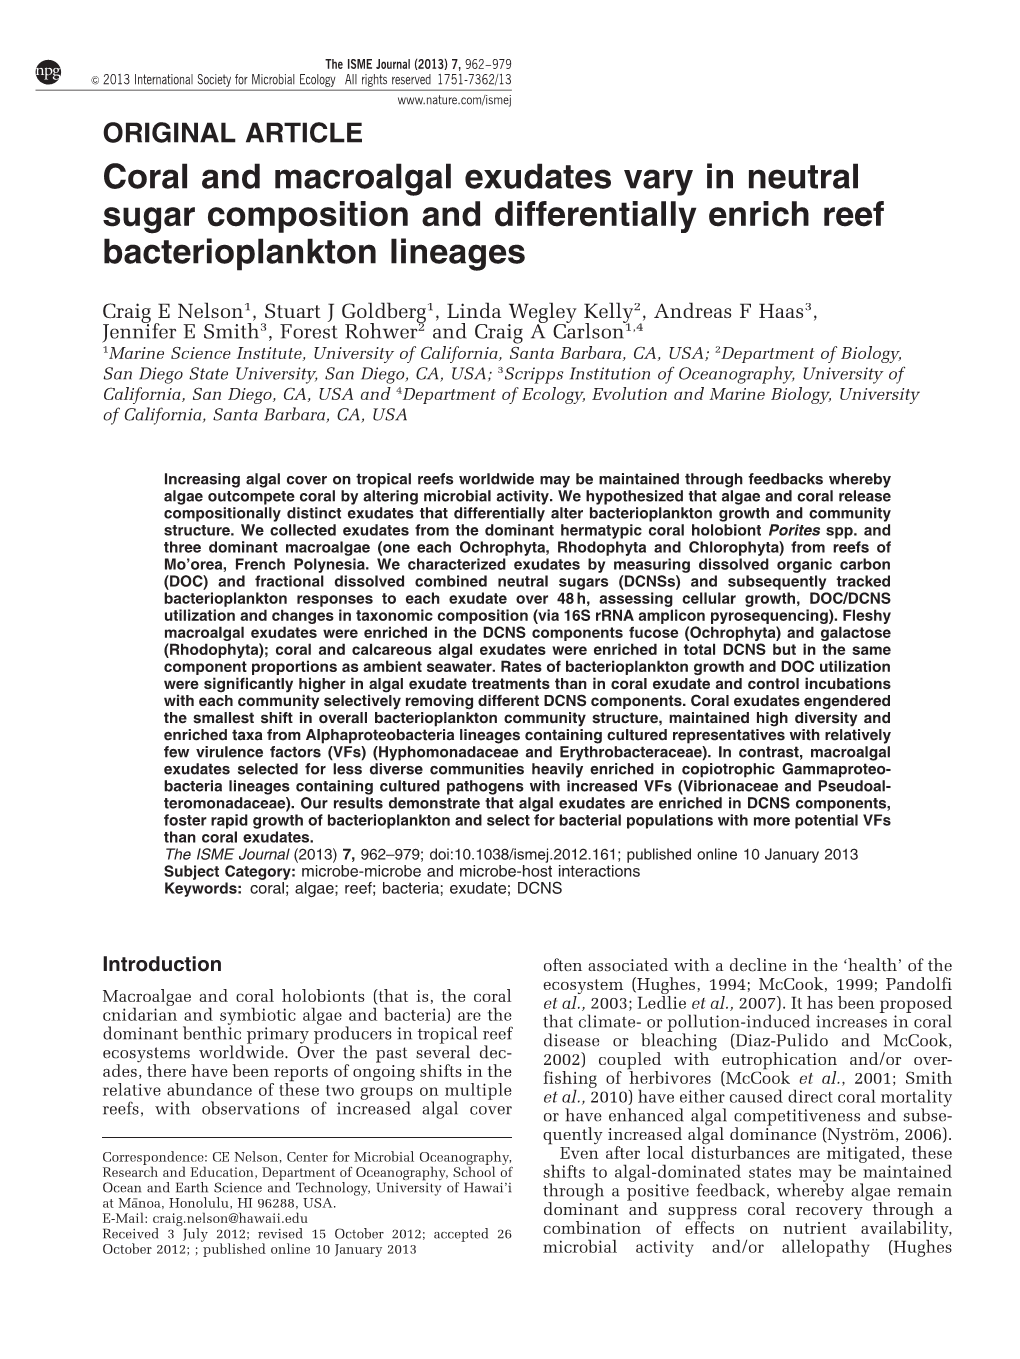 Coral and Macroalgal Exudates Vary in Neutral Sugar Composition and Differentially Enrich Reef Bacterioplankton Lineages